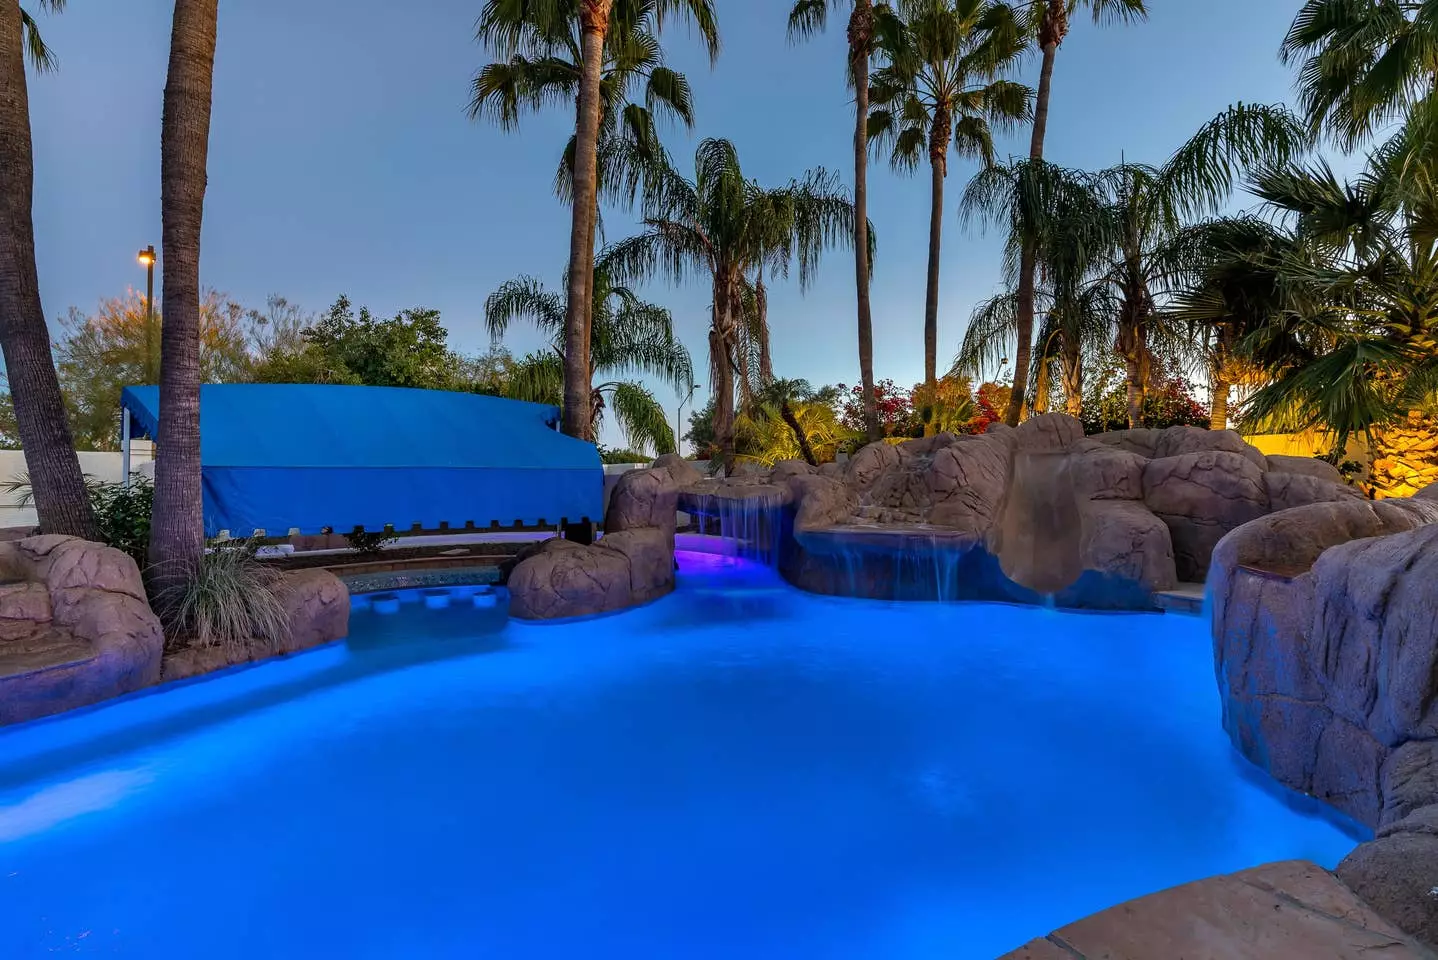 It also features waterfall seating and a swim up bar (